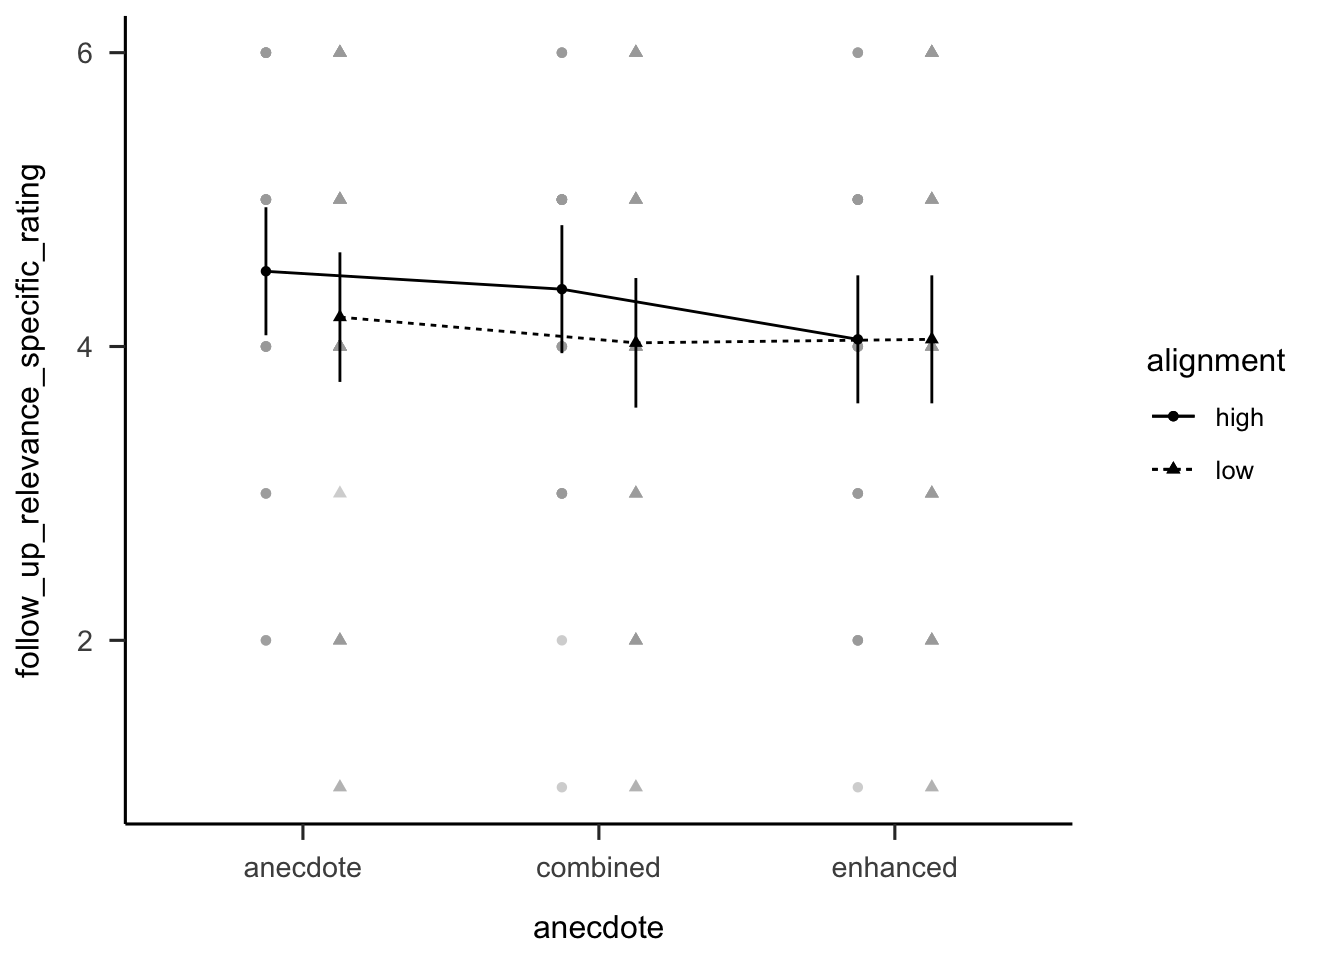 Mean rating of how relevant participants thought the anecdote was to Project A (the target project). Error bars represent 95% confidence intervals.